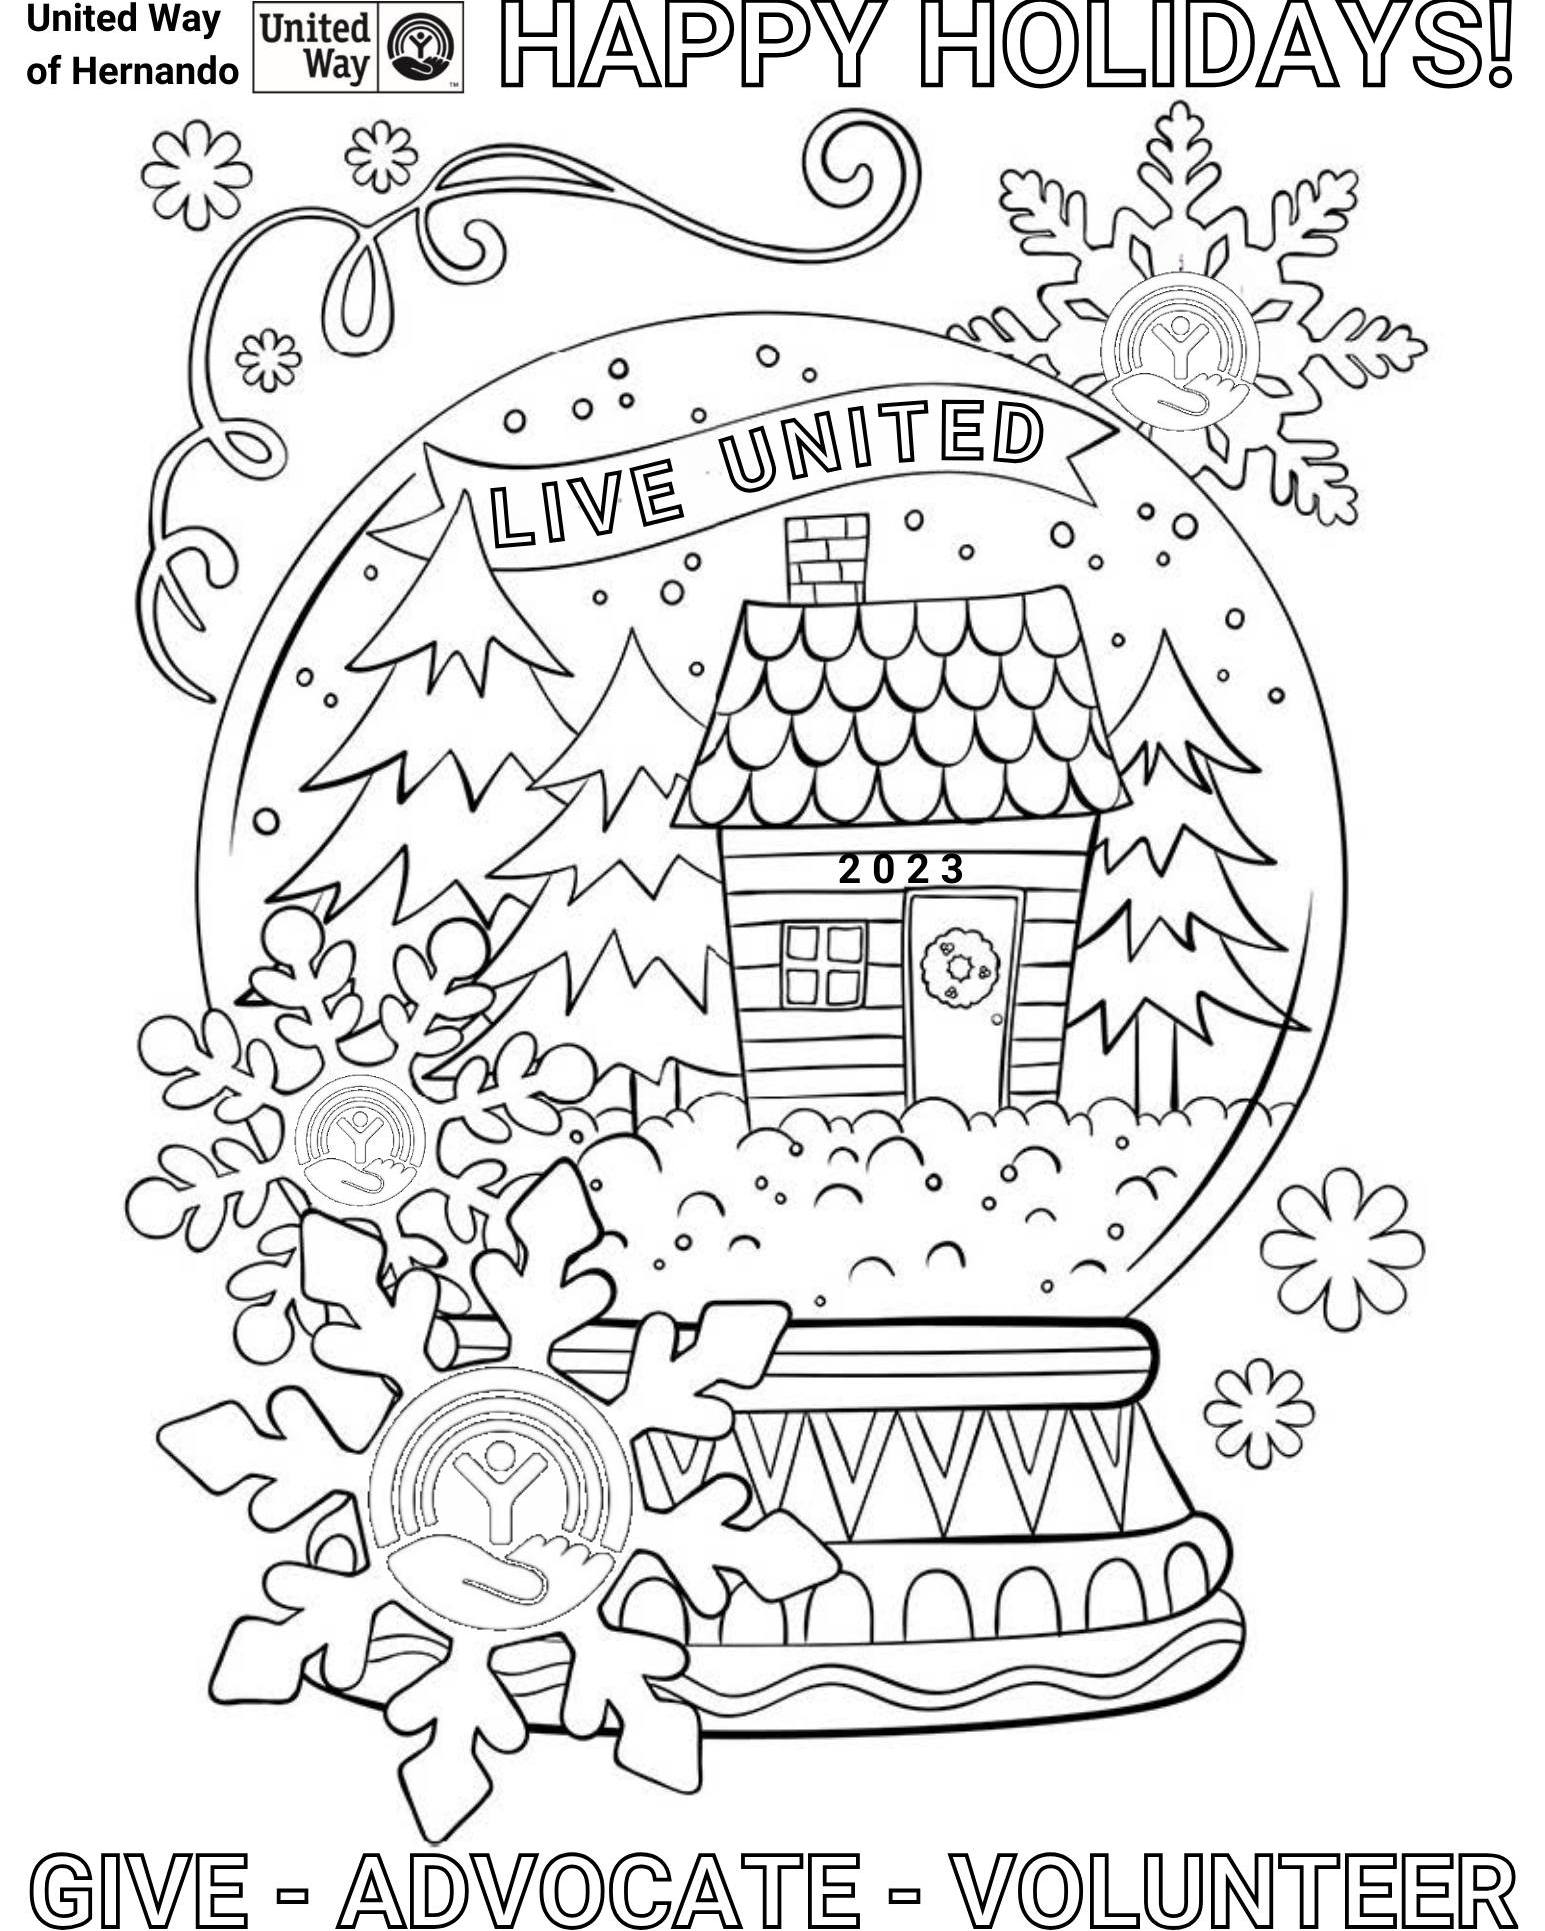 United way of hernando countys christmas card coloring contest